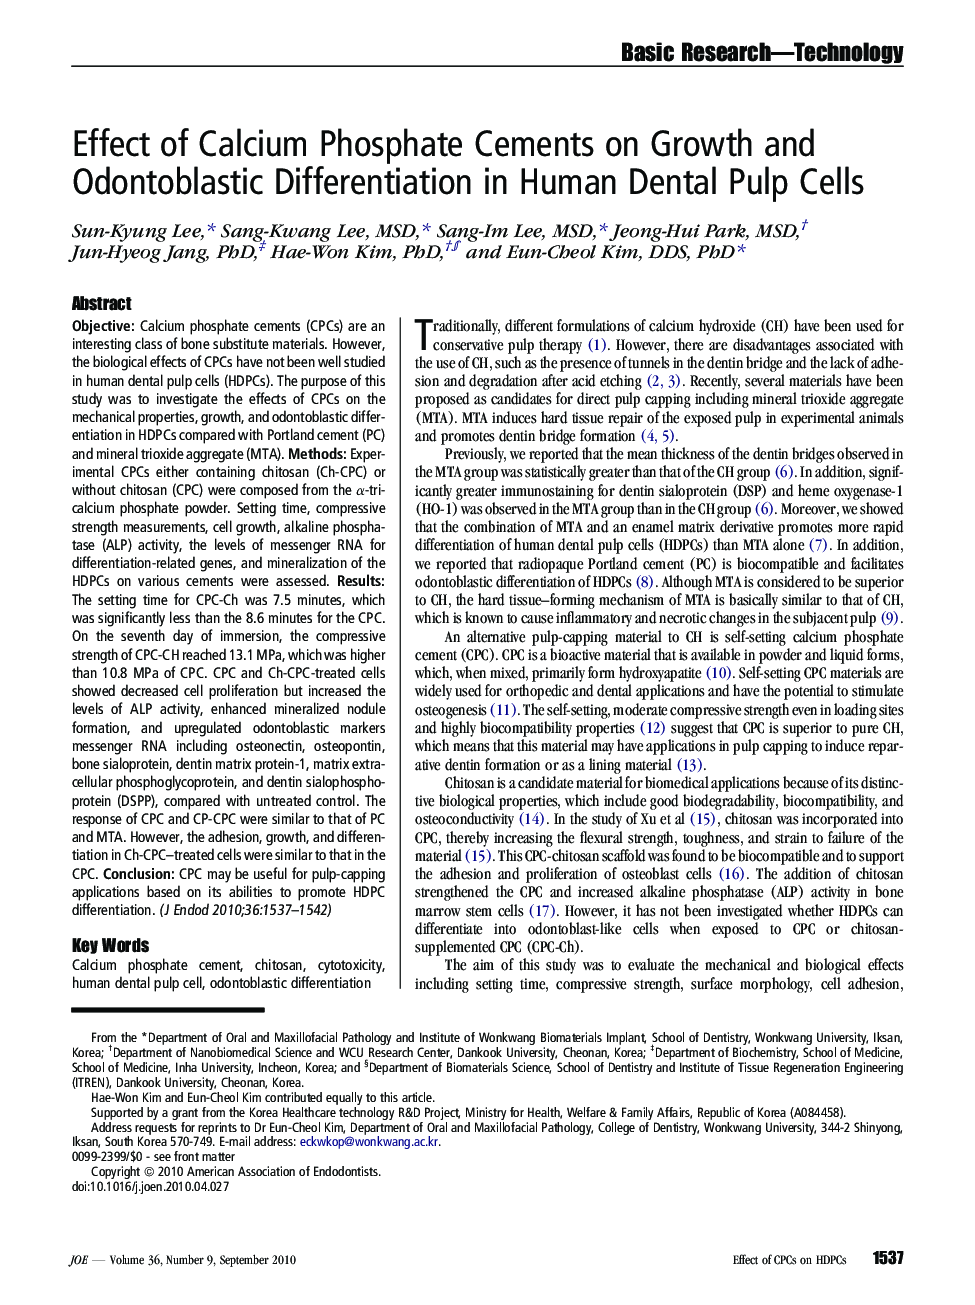 Effect of Calcium Phosphate Cements on Growth and Odontoblastic Differentiation in Human Dental Pulp Cells 